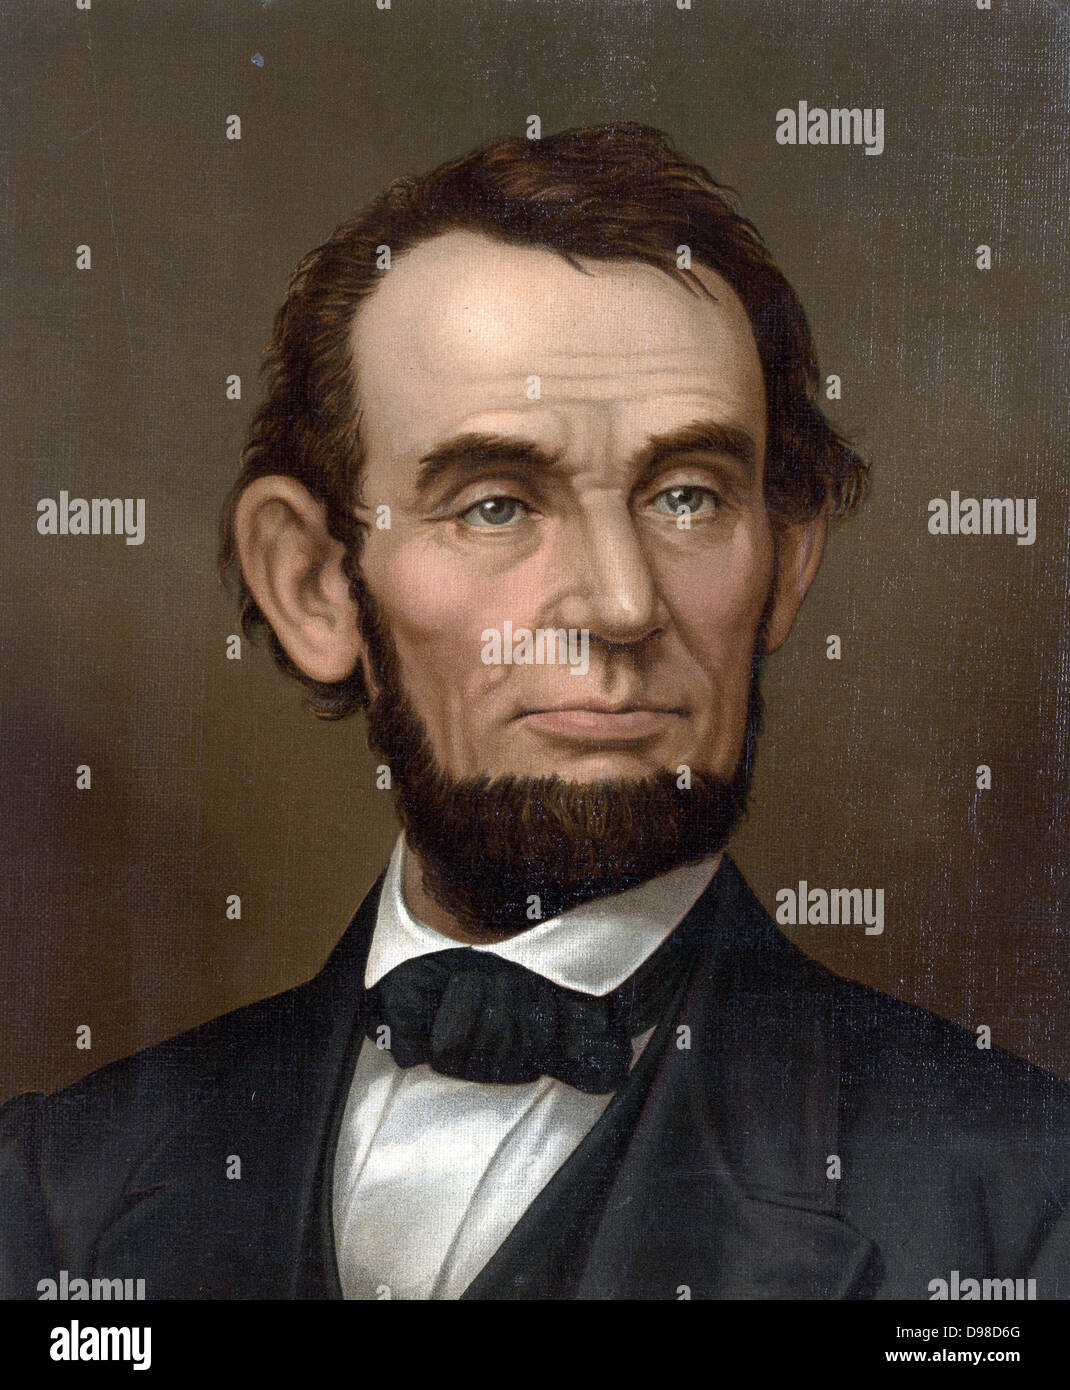 Abraham Lincoln (1809-1865), 16th President of the United States of America 1861-1865. Asassinated at Ford's Theatre, Washington by actor and Confederate spy John Wilkes Booth, 15 April 1865. Half-length portrait. Chromolithograph c1877. Stock Photo